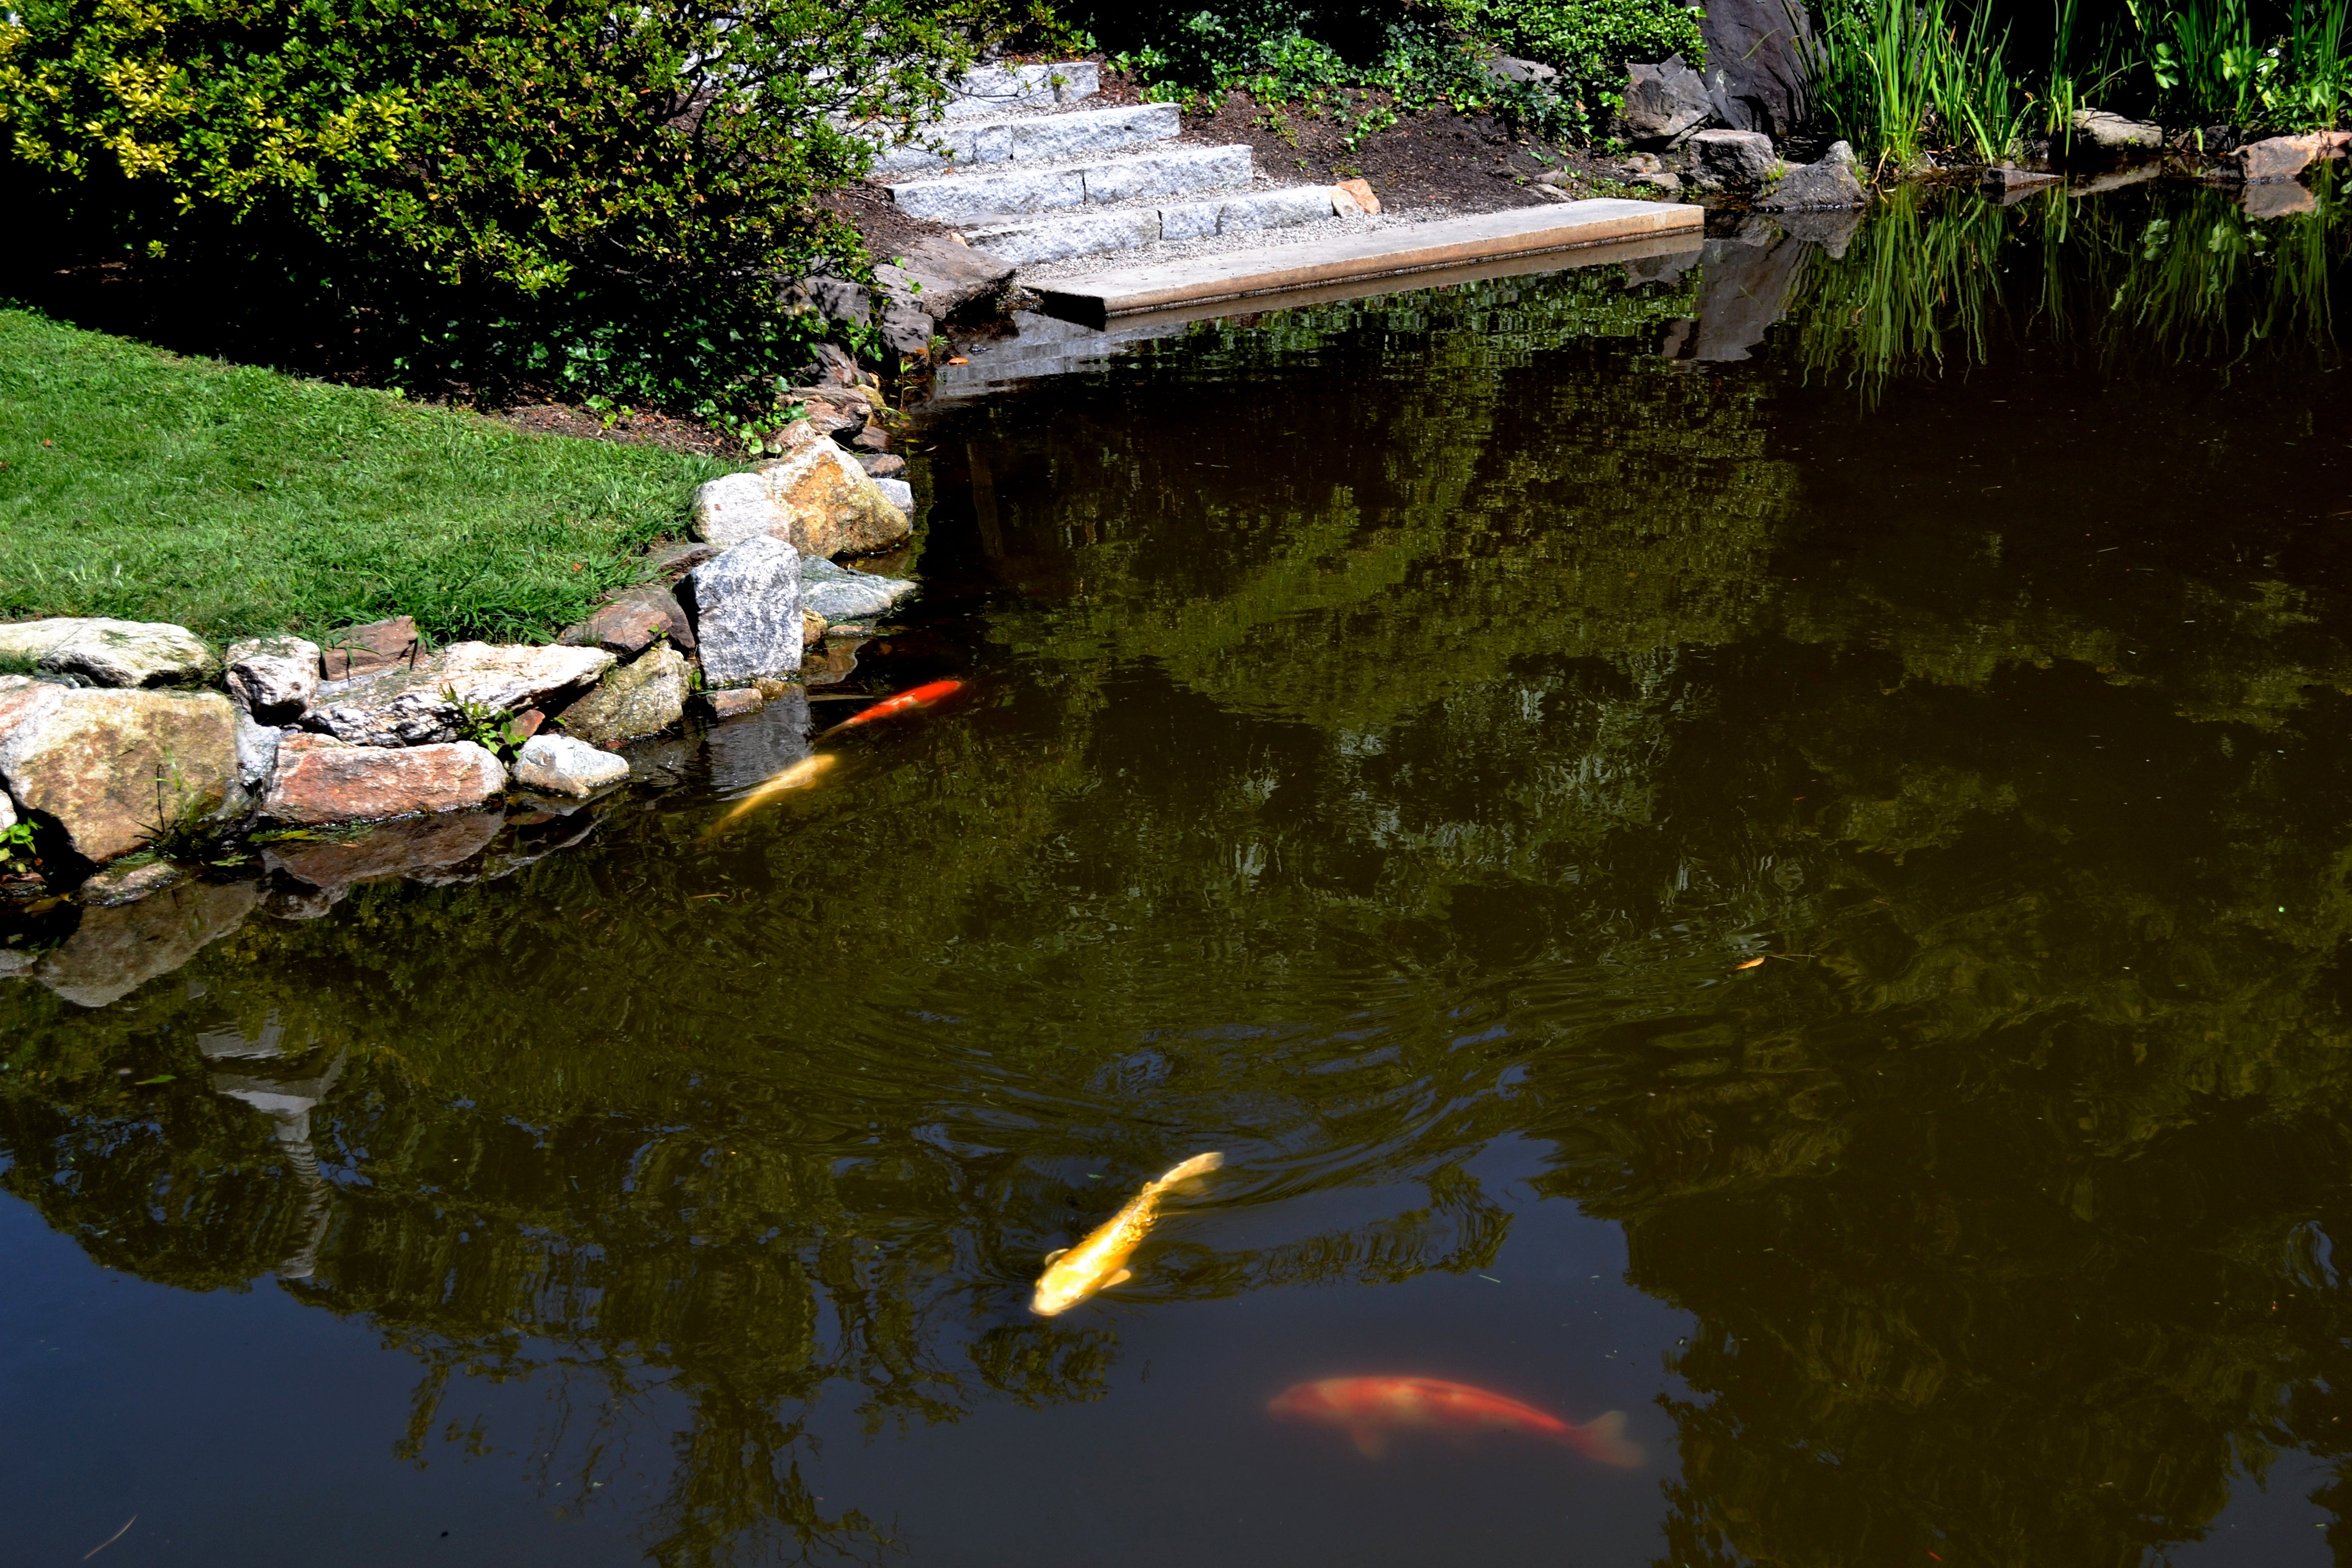 The granite steps and restored boat launch provide direct access to the koi pond